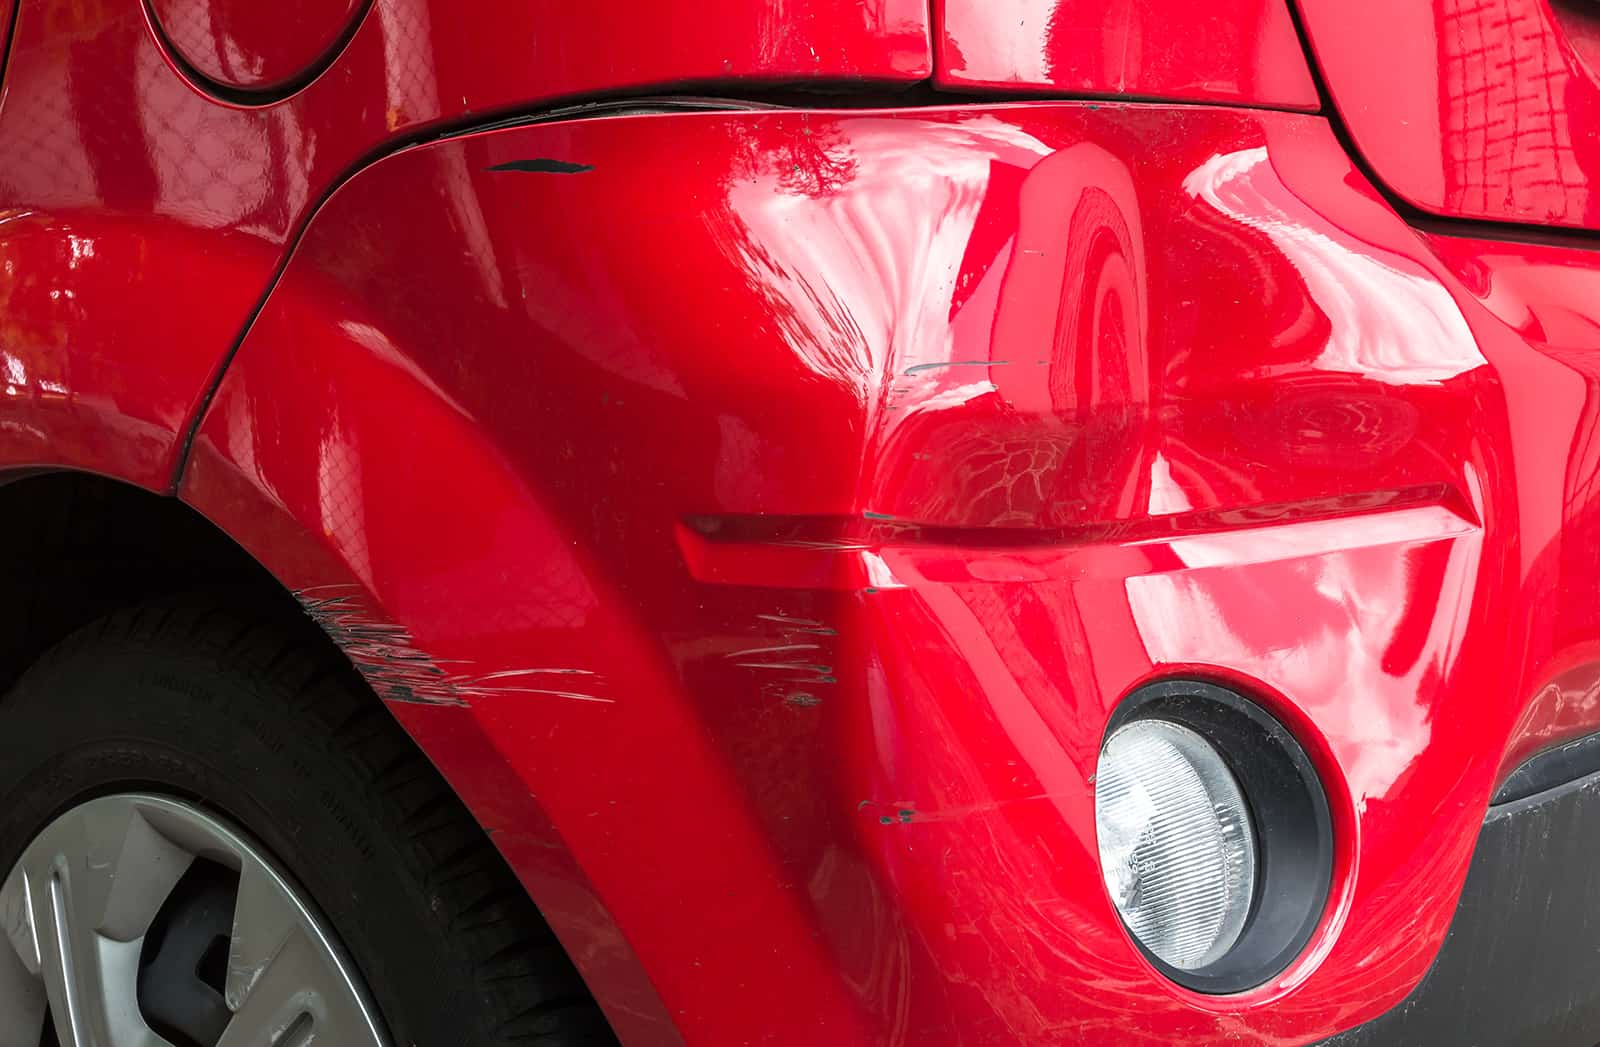 Paintless Dent Repair vs. Traditional Dent Removal